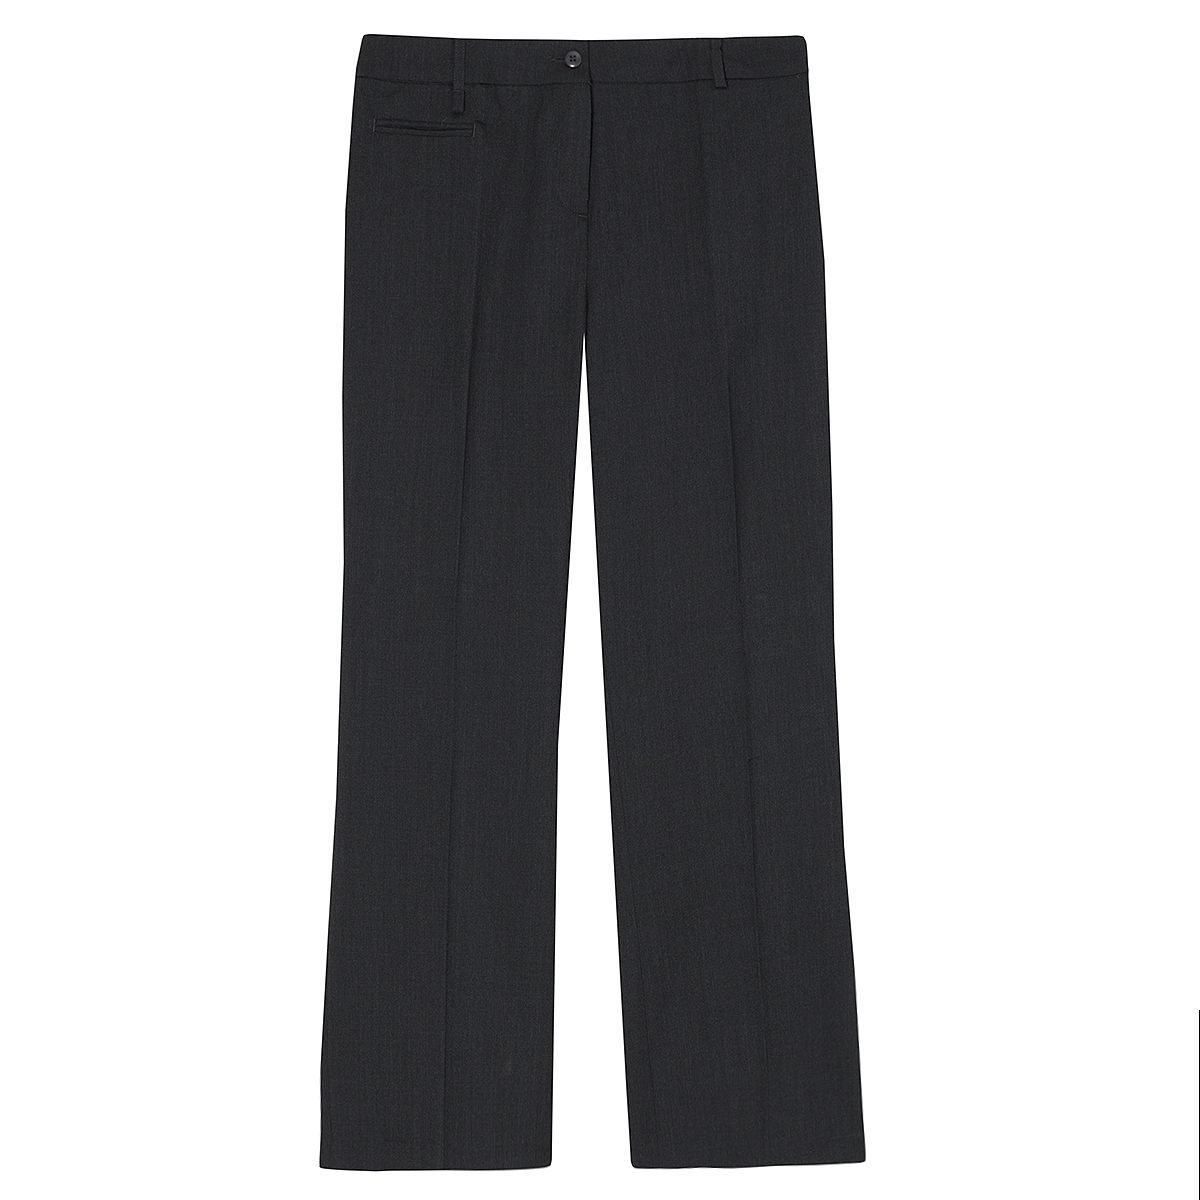 LADIES TROUSERS QUALITY BLACK FITTED BOOT CUT TROUSERS 6-14 & 3 LEG  LENGTHS.